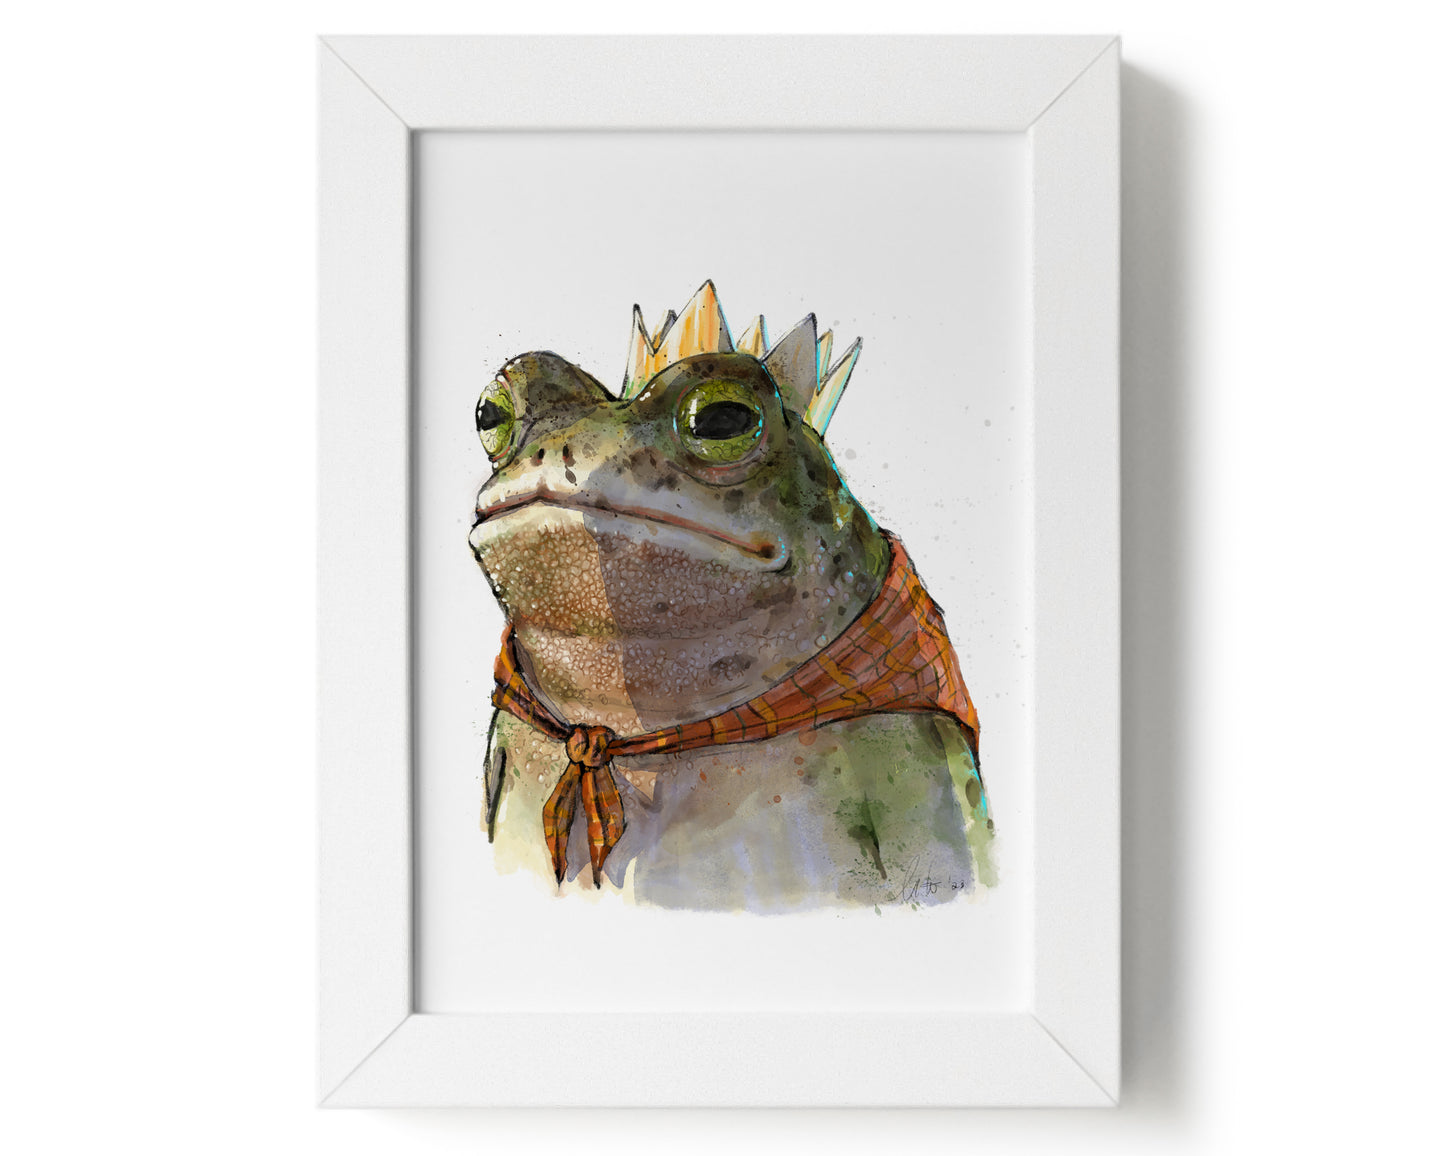 "Monarch of the Marsh" by Catherine Hébert - Toad King Watercolour Giclee Art Print - 5"x7" size